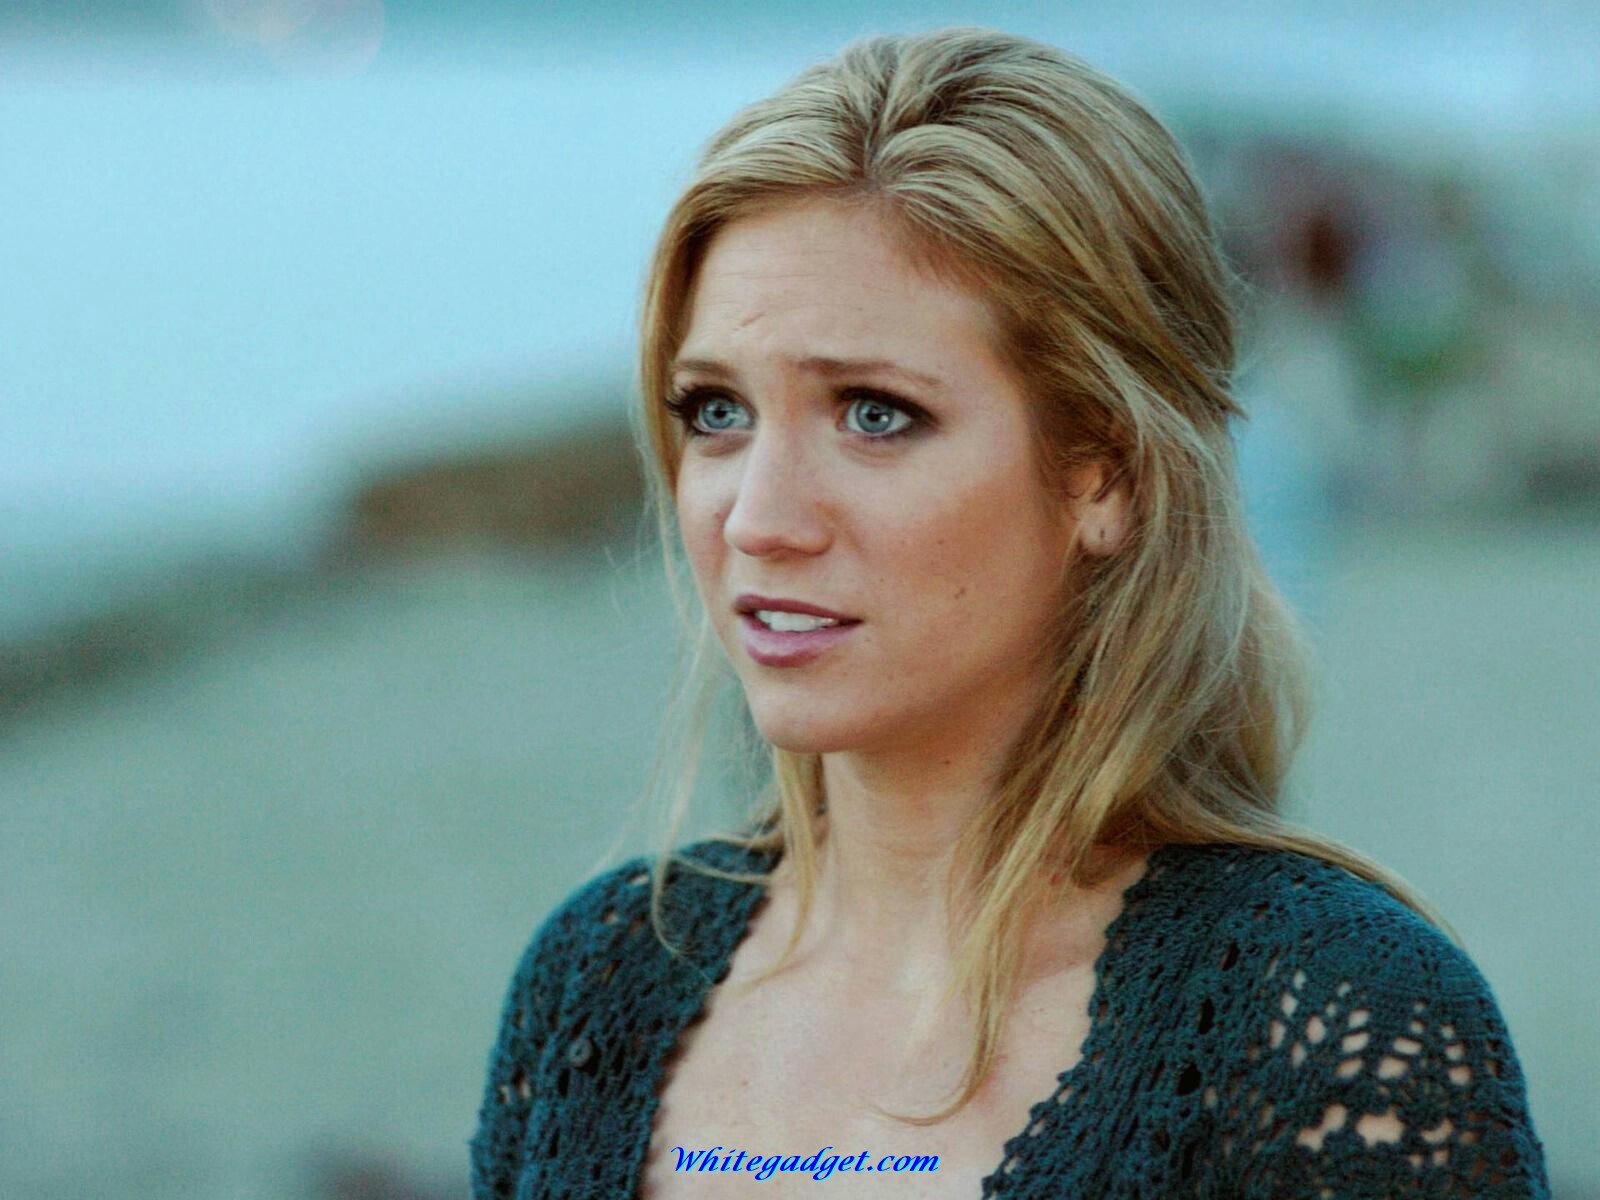 Brittany Snow Wallpaper High Resolution And Quality